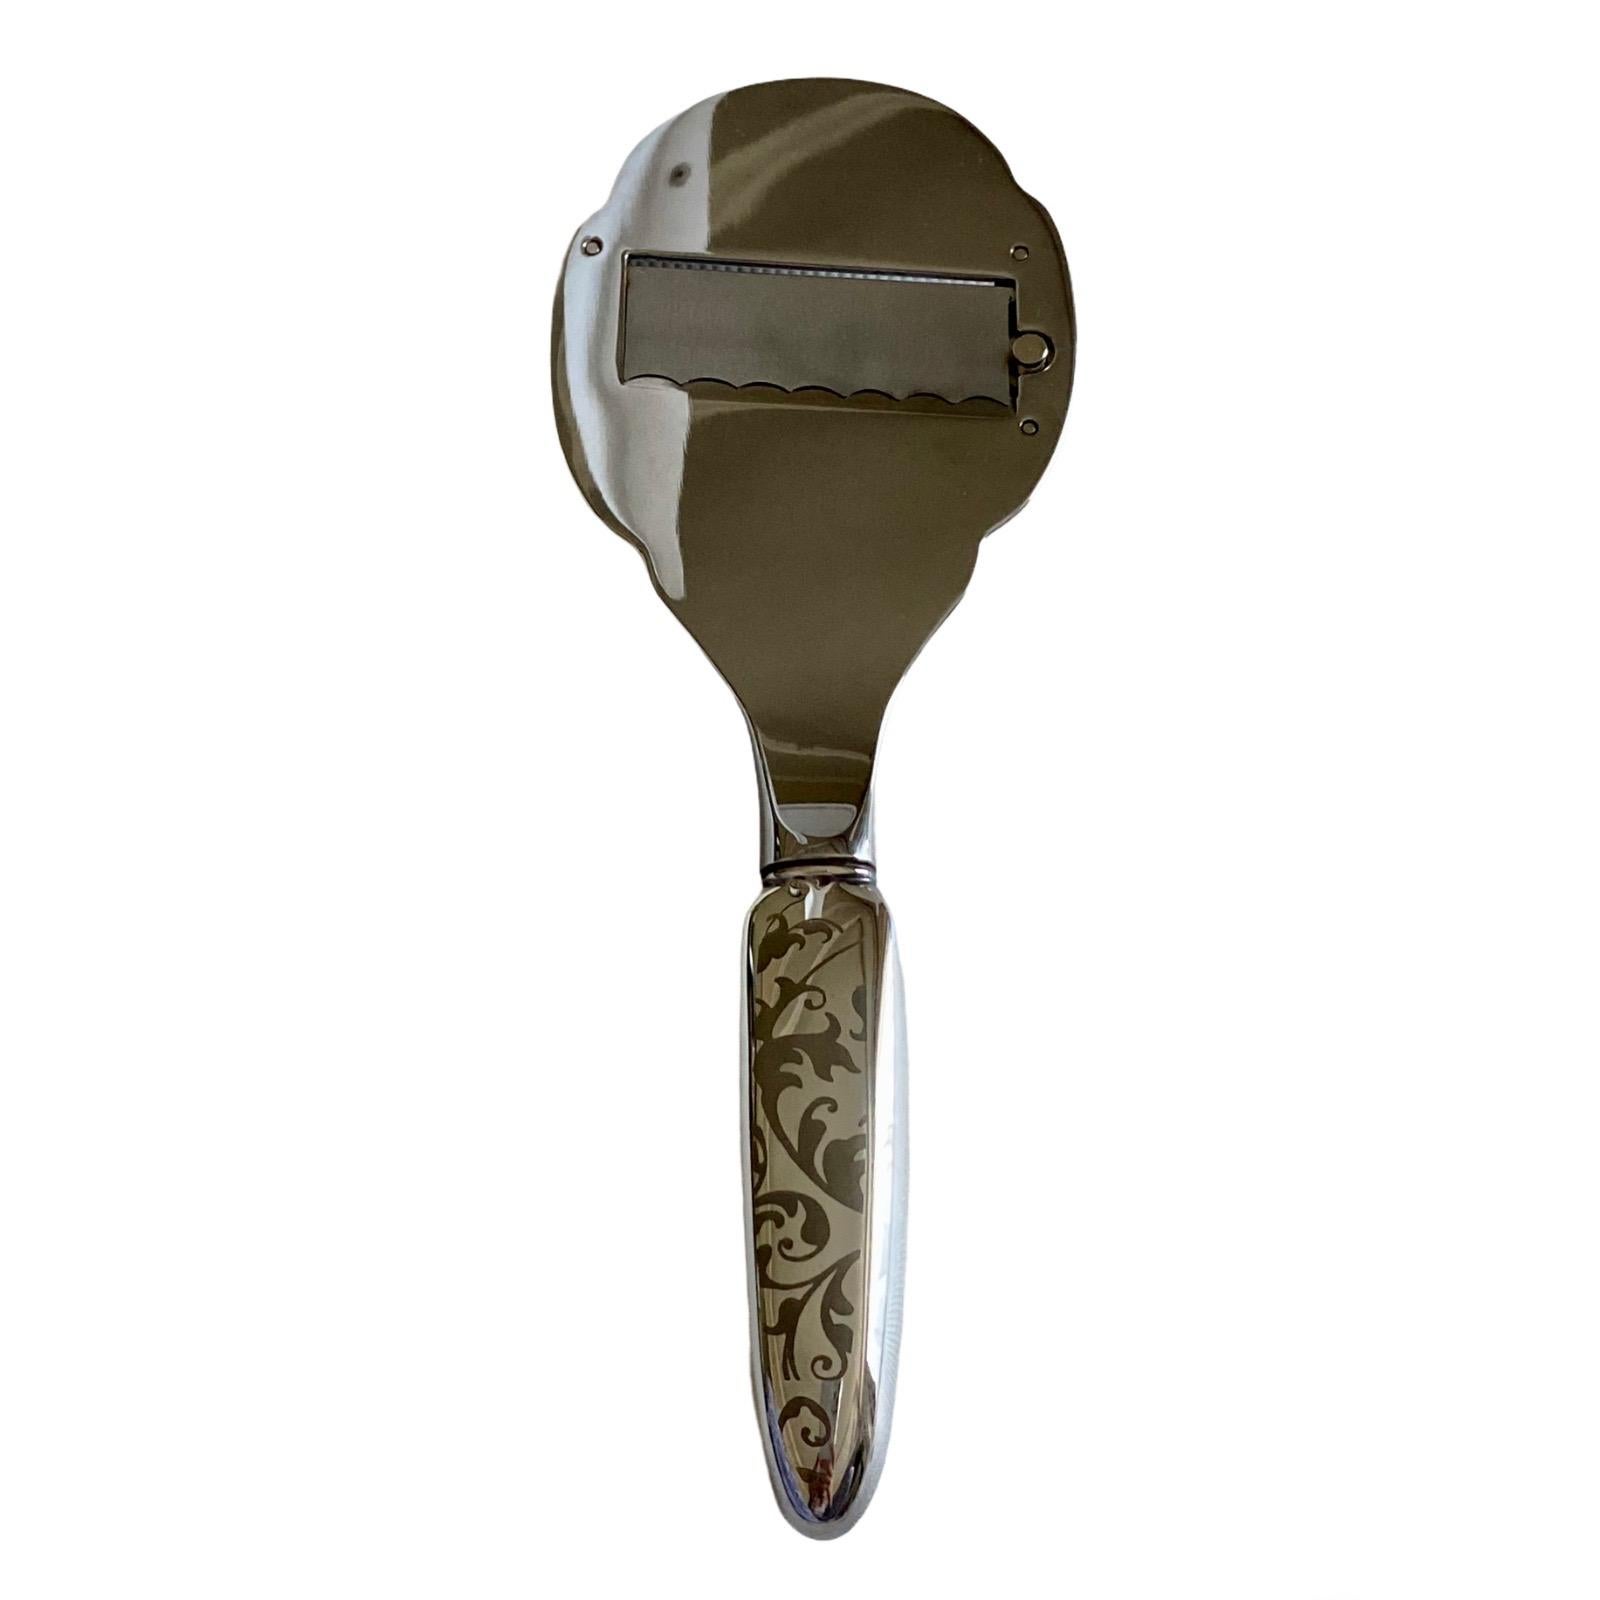 Beautiful set of truffle slicer & bottle opener by
De Grisogono by Fawaz Gruosi
In the signature design
Discreetly marked with „De Grisogono Geneve“
Handle in sterling silver with stainless steel top
Comes in original box